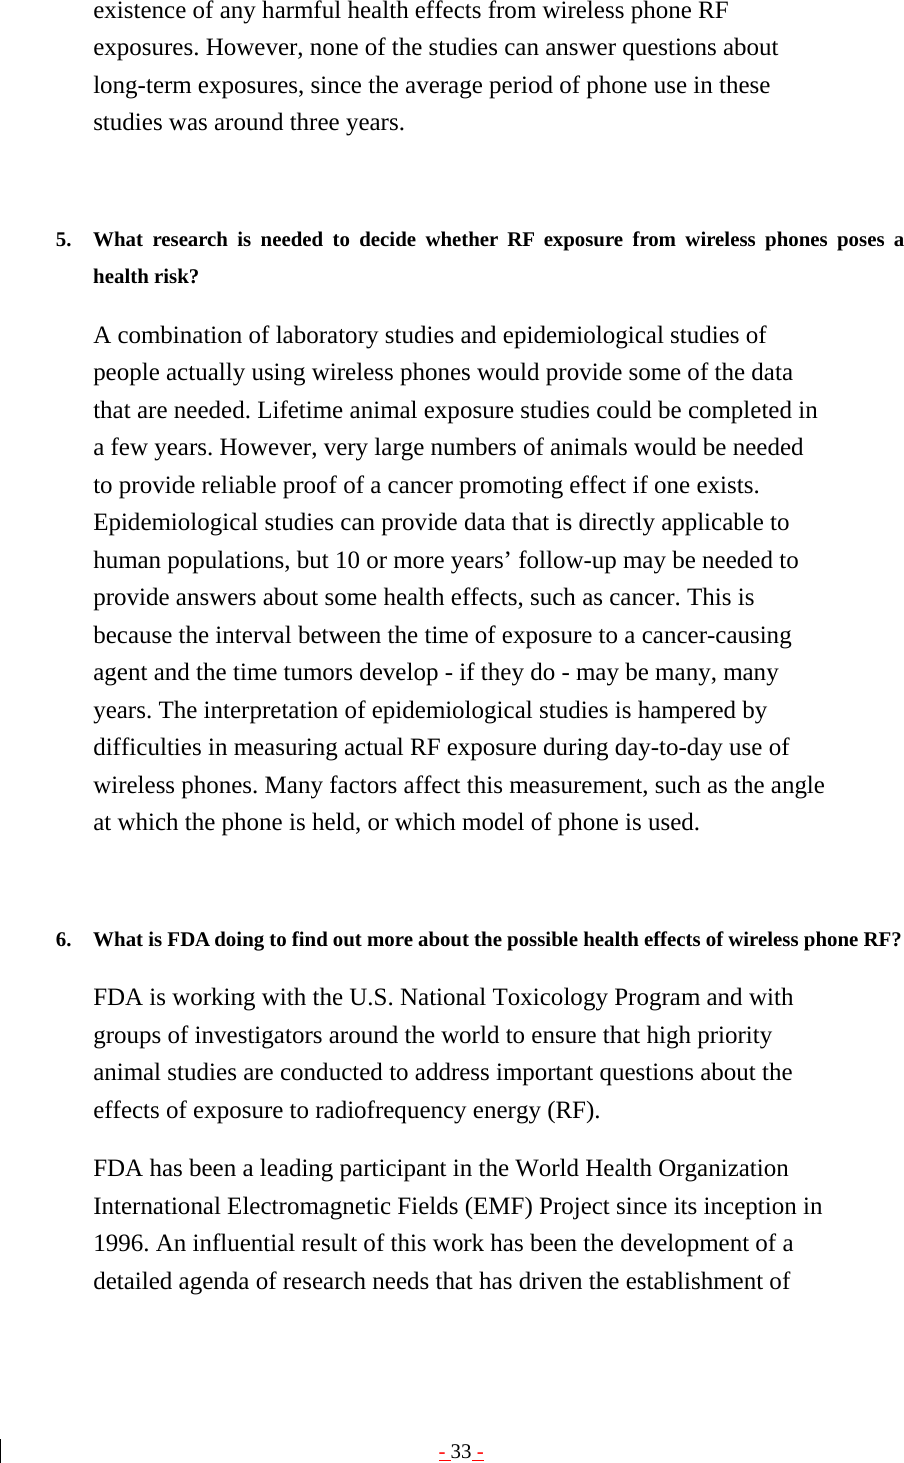 - 33 - existence of any harmful health effects from wireless phone RF exposures. However, none of the studies can answer questions about long-term exposures, since the average period of phone use in these studies was around three years.   5. What research is needed to decide whether RF exposure from wireless phones poses a health risk?   A combination of laboratory studies and epidemiological studies of people actually using wireless phones would provide some of the data that are needed. Lifetime animal exposure studies could be completed in a few years. However, very large numbers of animals would be needed to provide reliable proof of a cancer promoting effect if one exists. Epidemiological studies can provide data that is directly applicable to human populations, but 10 or more years’ follow-up may be needed to provide answers about some health effects, such as cancer. This is because the interval between the time of exposure to a cancer-causing agent and the time tumors develop - if they do - may be many, many years. The interpretation of epidemiological studies is hampered by difficulties in measuring actual RF exposure during day-to-day use of wireless phones. Many factors affect this measurement, such as the angle at which the phone is held, or which model of phone is used.   6. What is FDA doing to find out more about the possible health effects of wireless phone RF?   FDA is working with the U.S. National Toxicology Program and with groups of investigators around the world to ensure that high priority animal studies are conducted to address important questions about the effects of exposure to radiofrequency energy (RF). FDA has been a leading participant in the World Health Organization International Electromagnetic Fields (EMF) Project since its inception in 1996. An influential result of this work has been the development of a detailed agenda of research needs that has driven the establishment of 